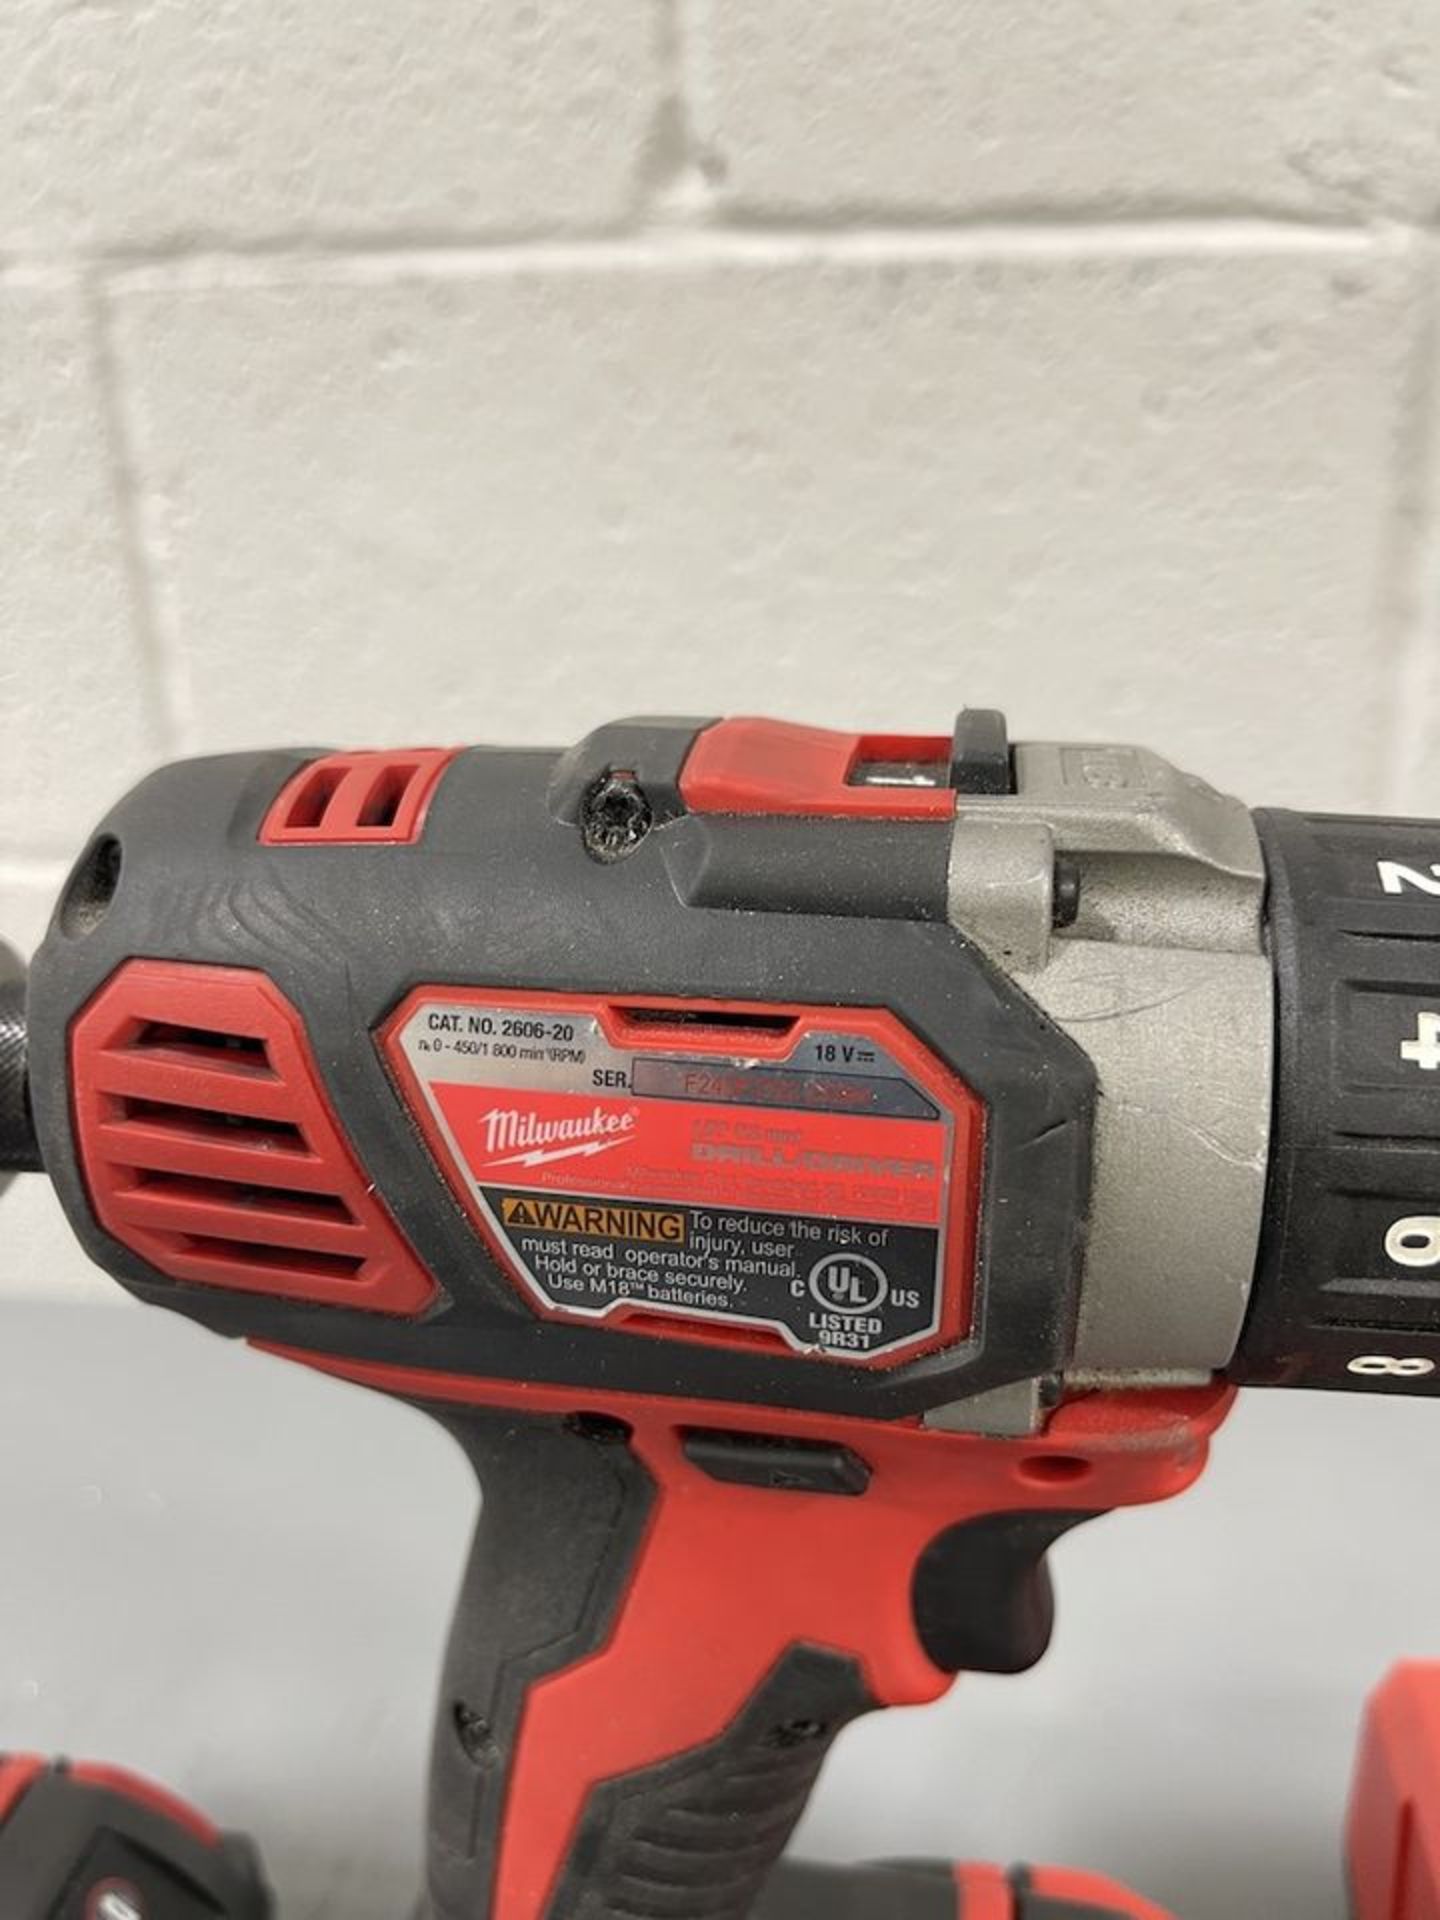 Lot - (1) Milwaukee 1/4 in. 18-V Hex Impact Driver; (1) Milwaukee 1/2 in. 18-V Drill Driver; - Image 3 of 4